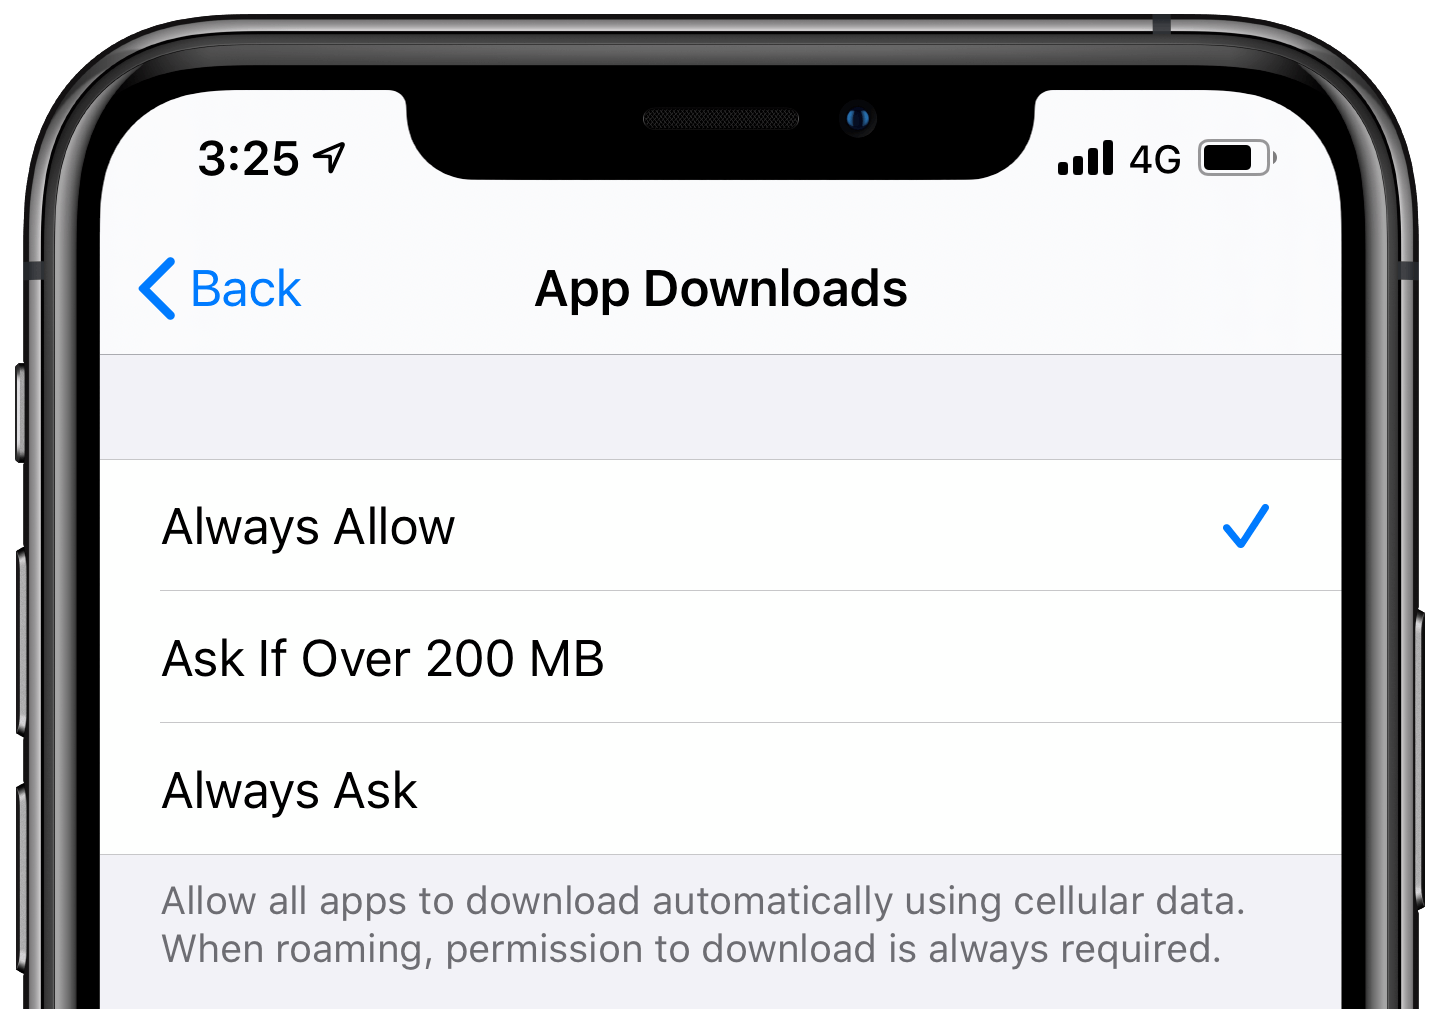 Discover How To Download An App Over 200 MB Without Wi-Fi And More App Tips